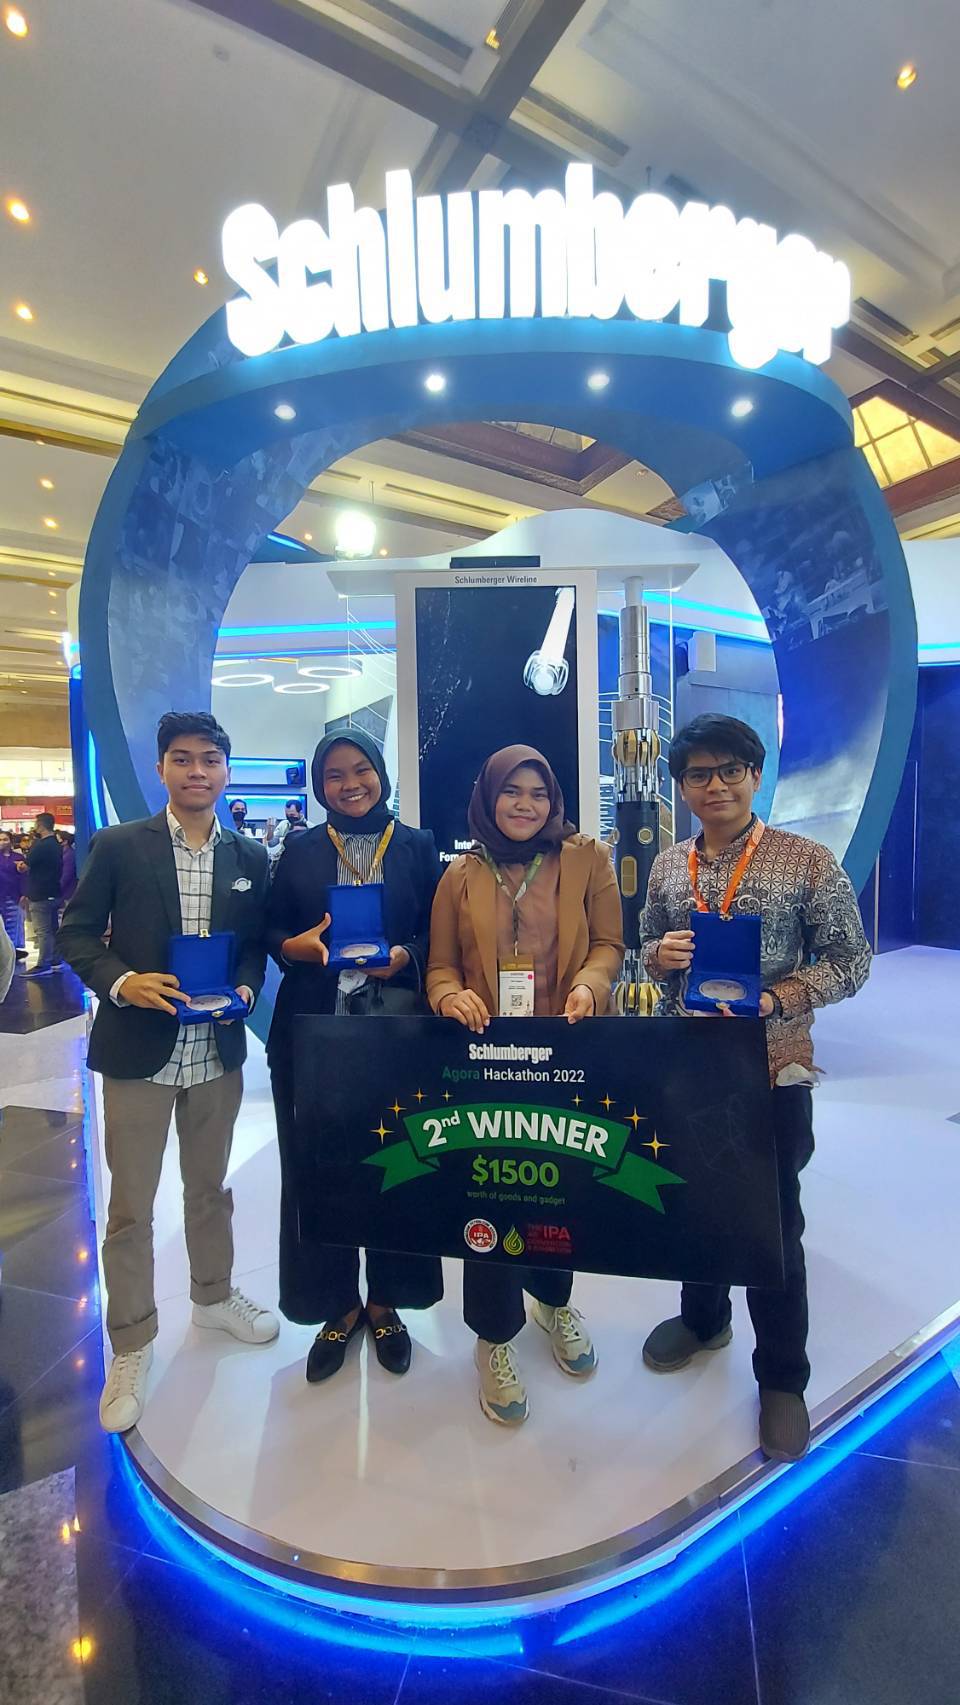 smart-camera-surveillance-system-itb-student-developers-achieved-2nd-place-on-the-schlumberger-agora-hackathon-2022